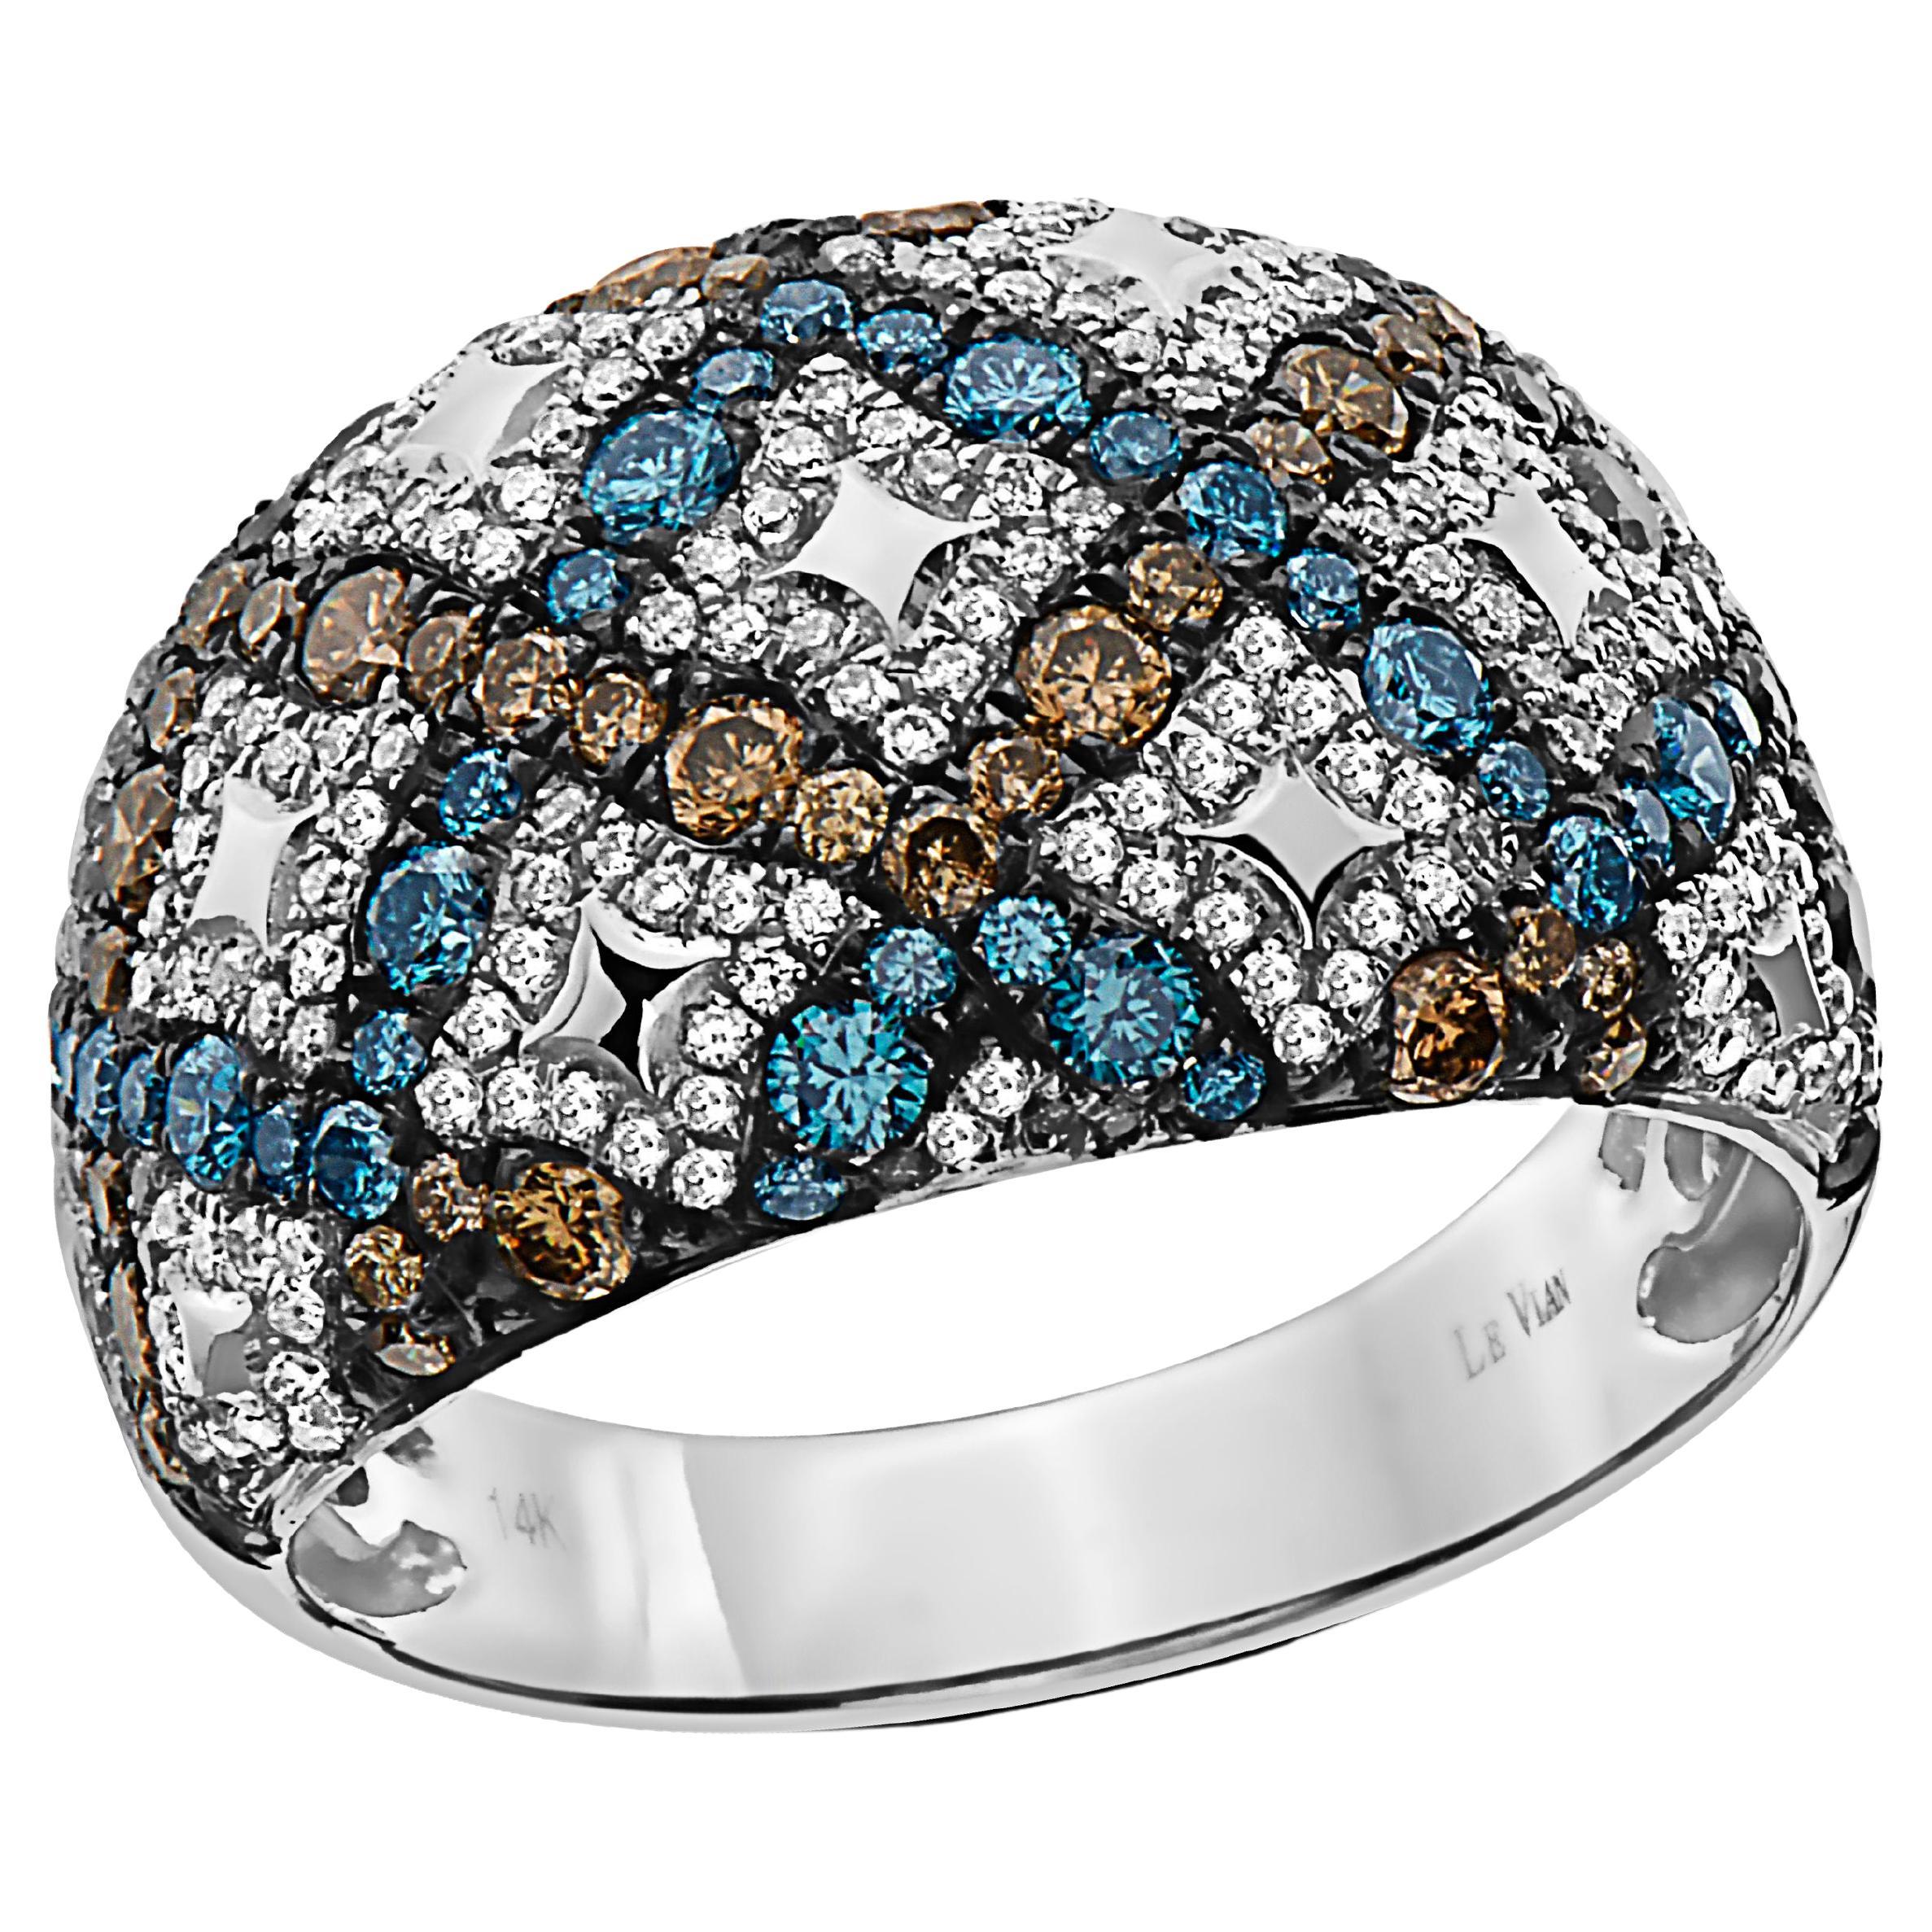 LeVian Ring Blue, Chocolate, and White Diamonds Set in 14K White Gold